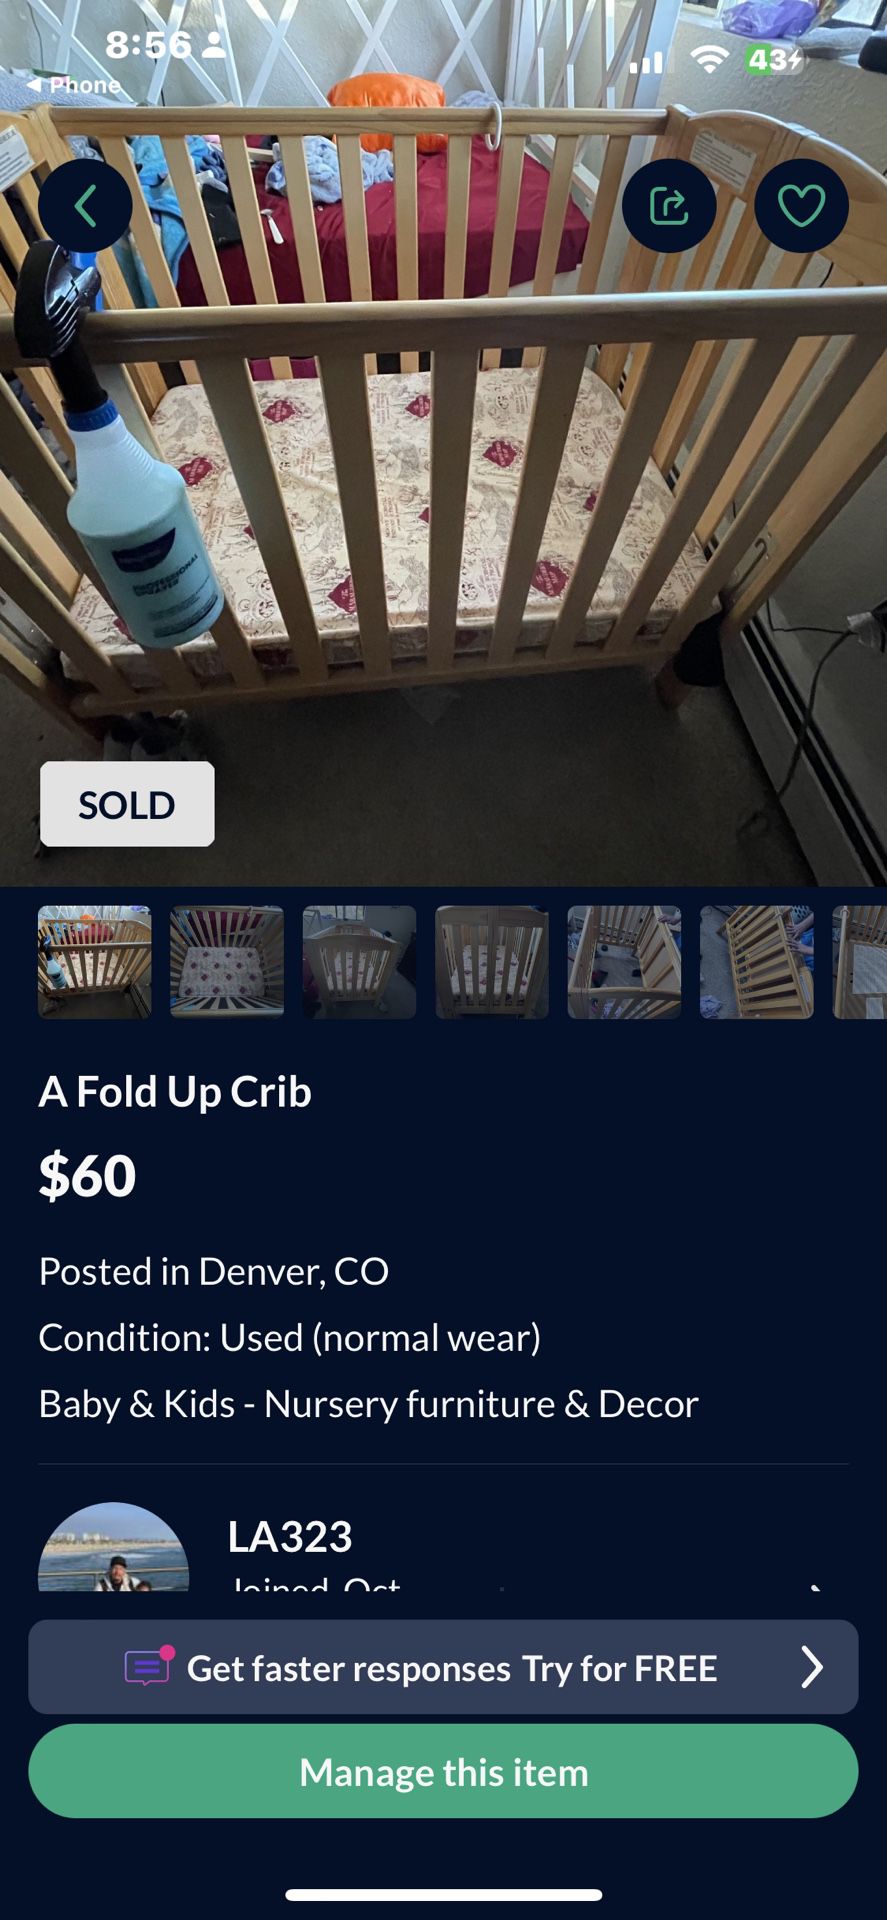 I Know The Crib Says Sold, But It’s Not Sold